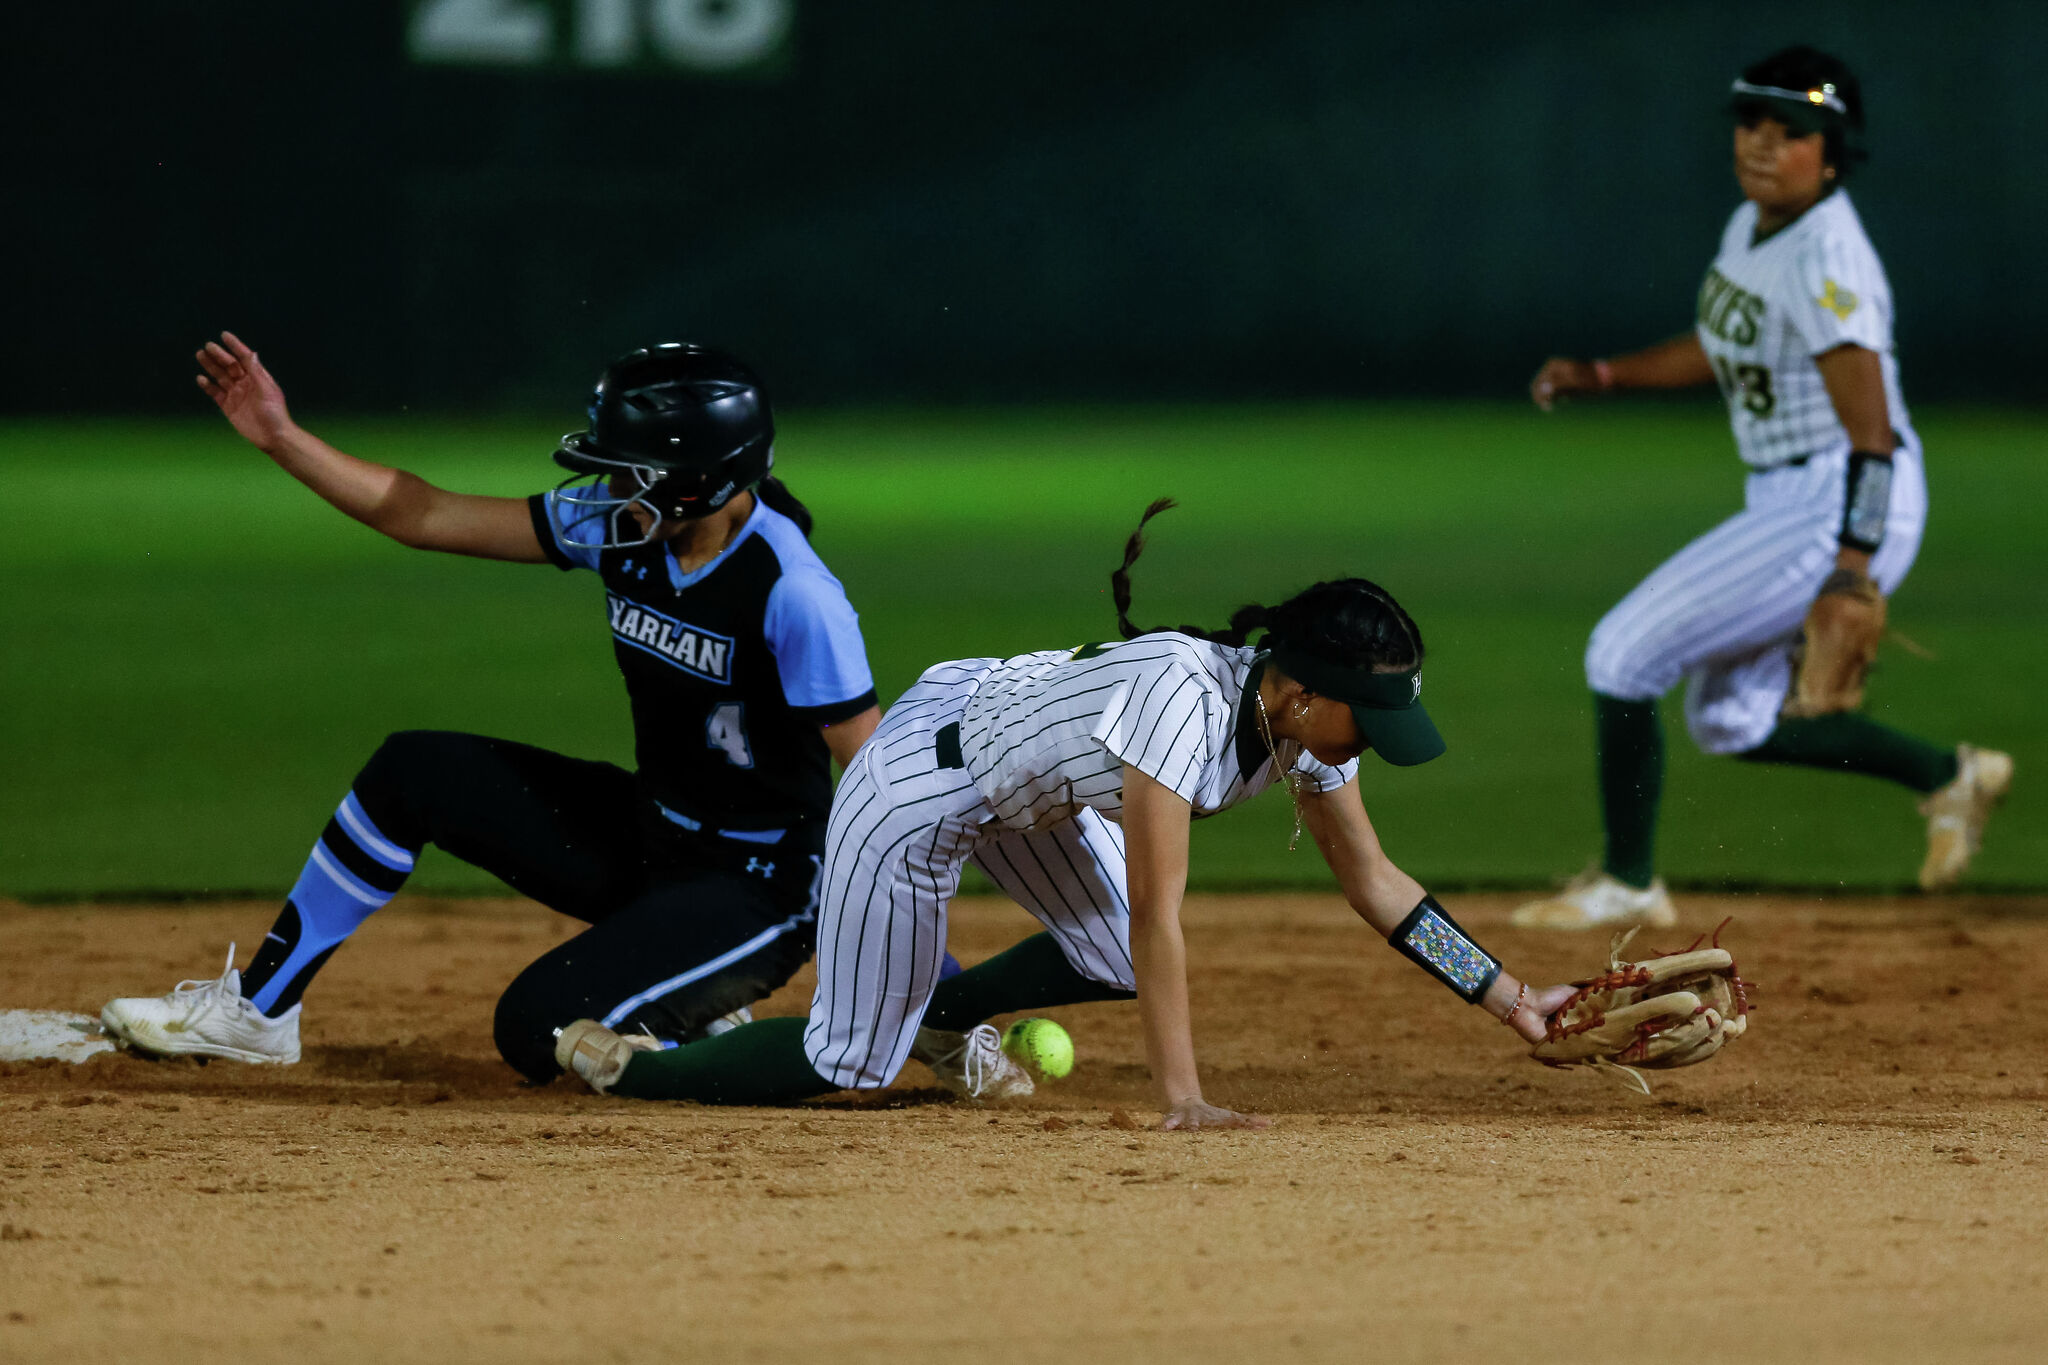  Harlan softball tops Holmes in tight District 29-6A game 